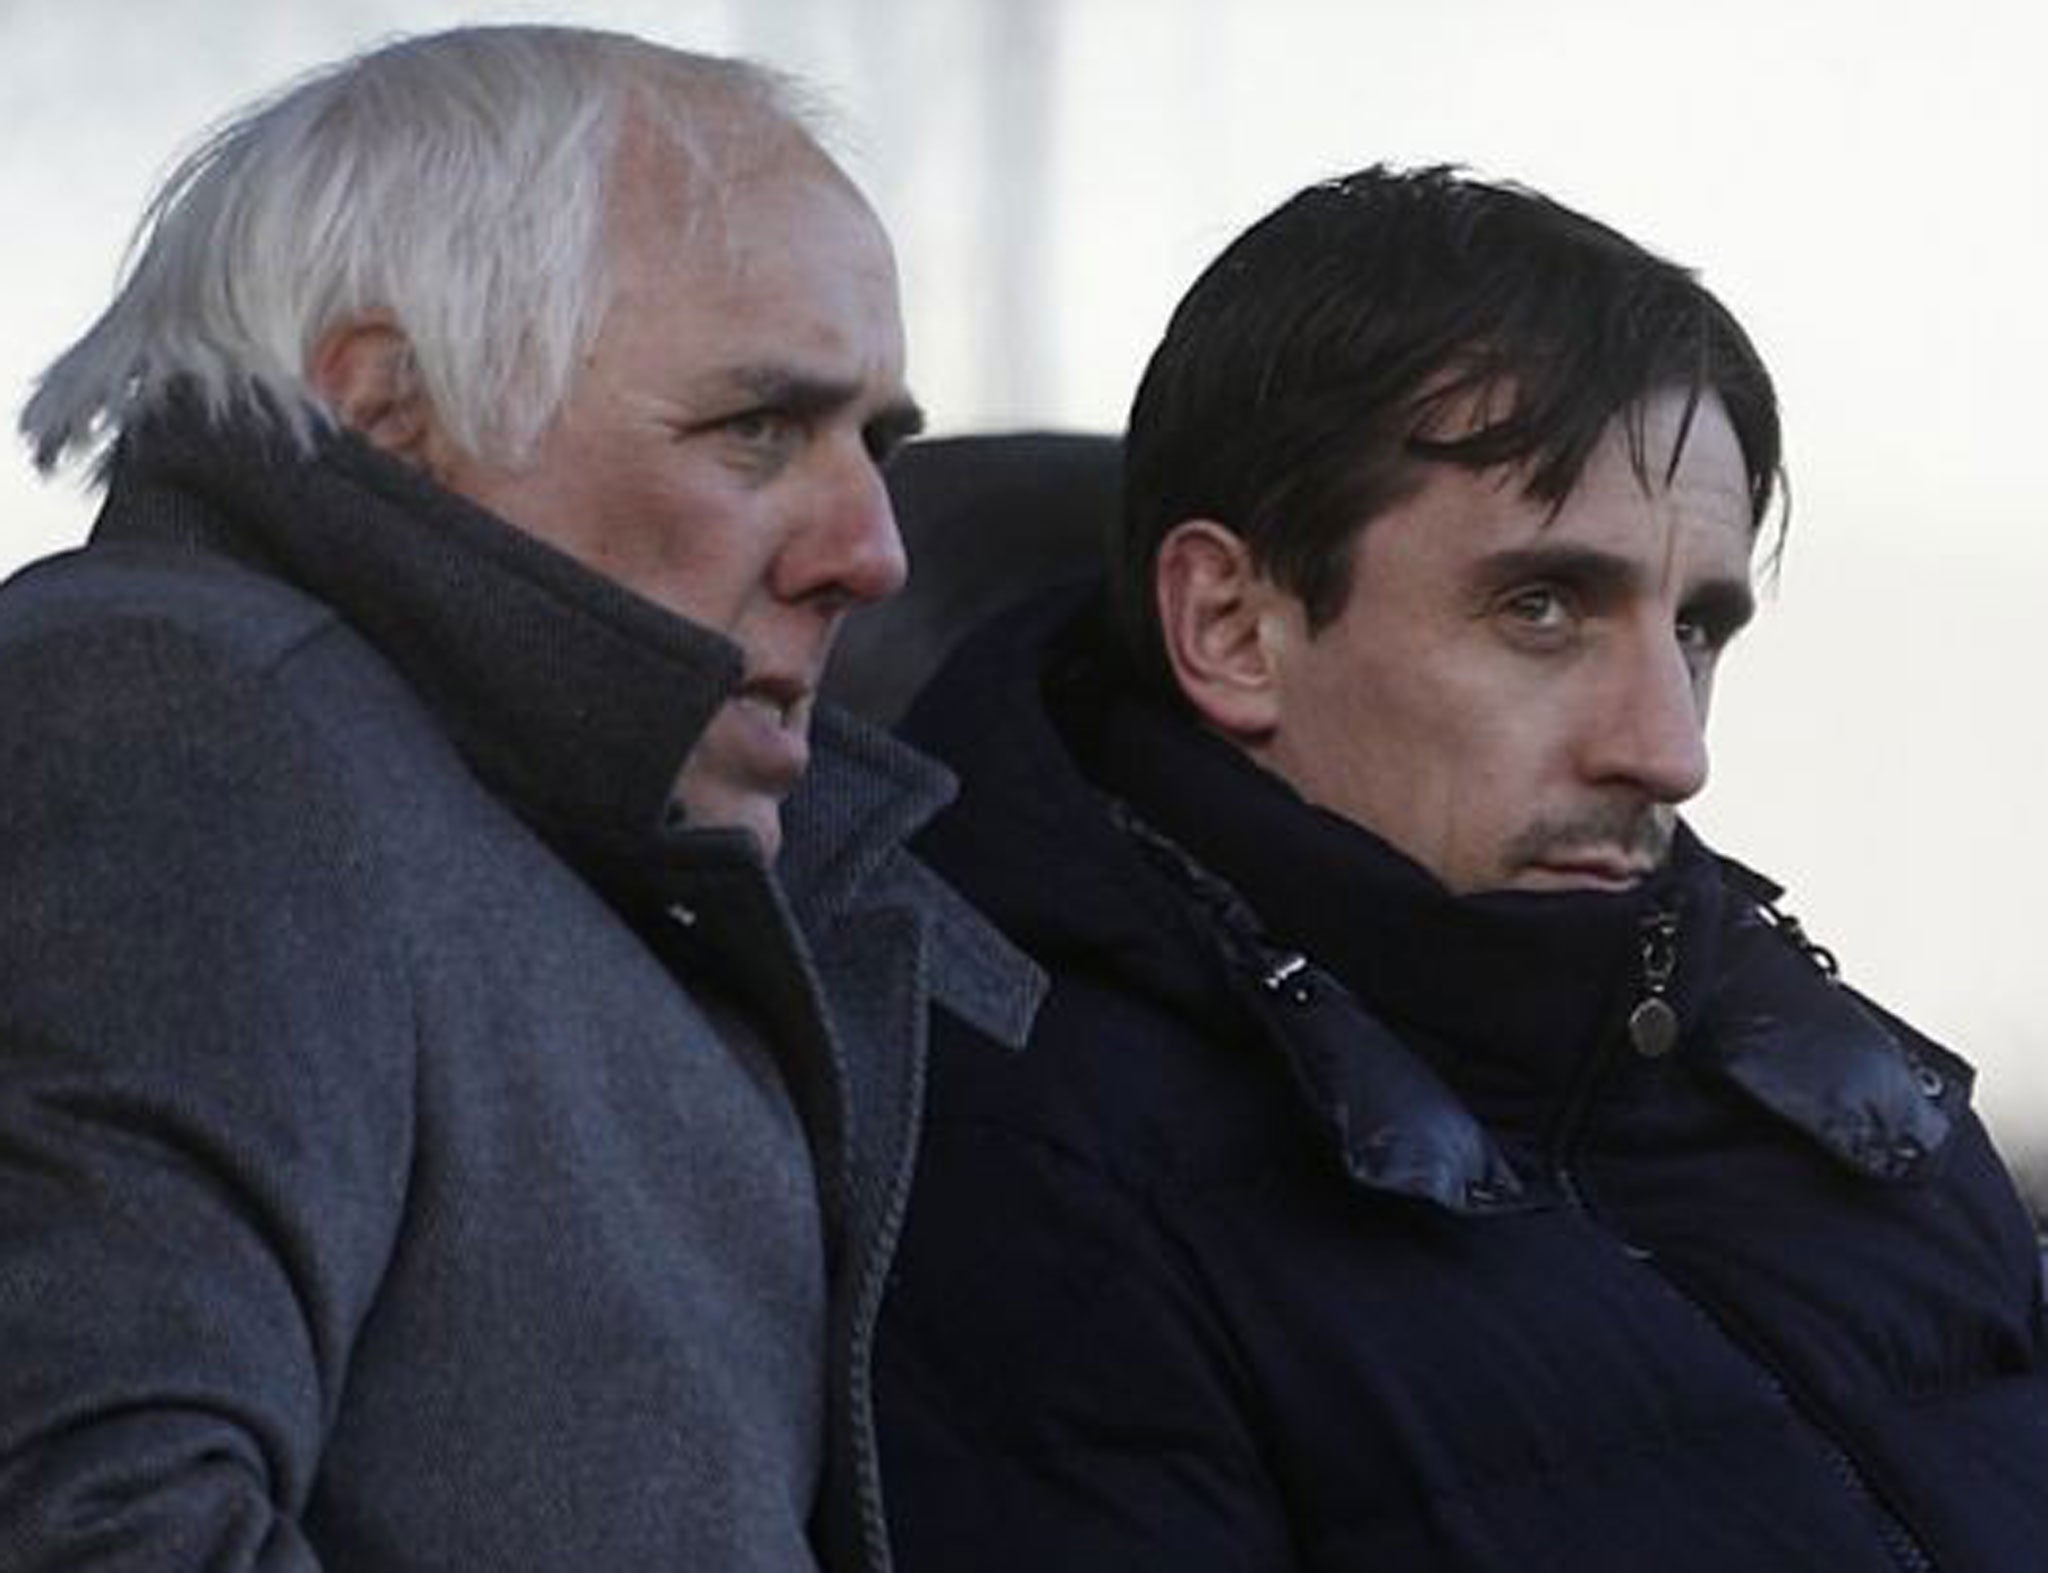 Neville Neville (left), seen here with his son Gary Neville, has been charged in connection with an alleged sexual assault